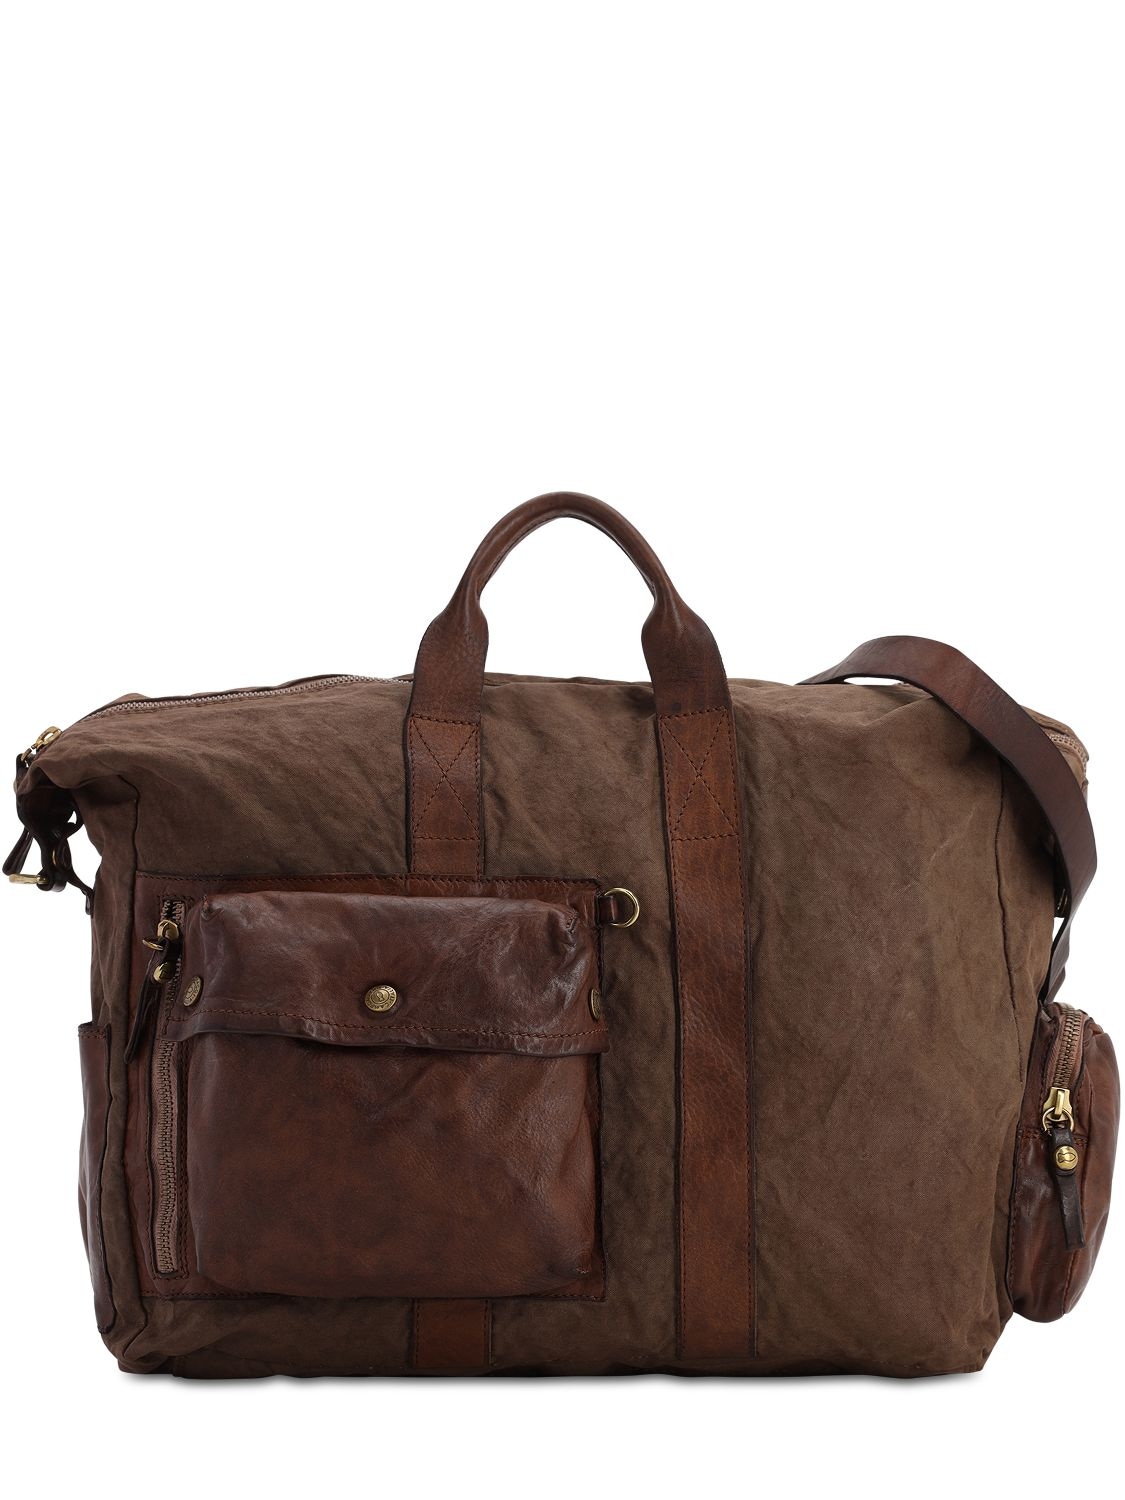 Campomaggi Canvas Duffle Bag In Brown